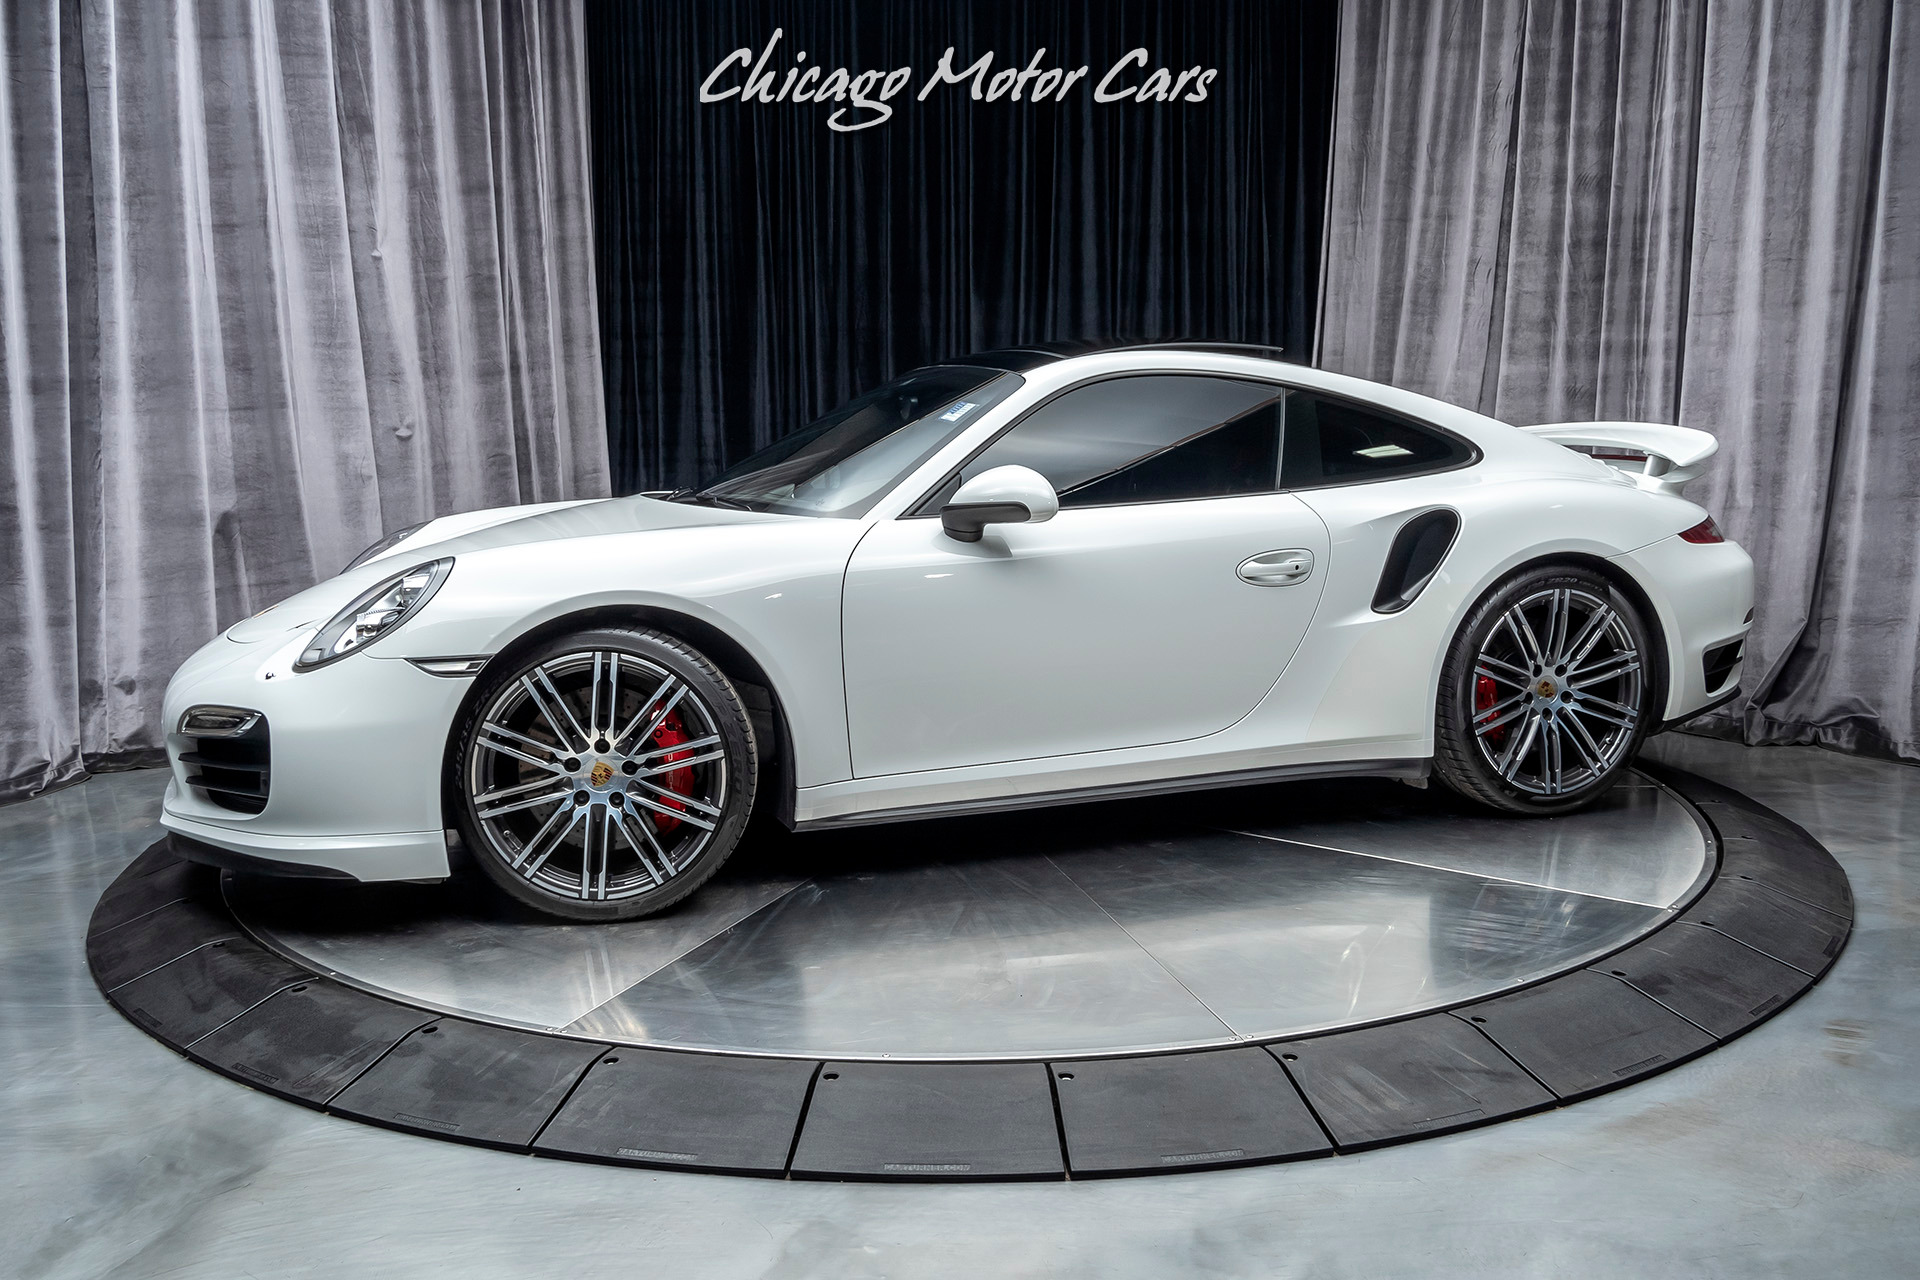 Used-2015-Porsche-911-Turbo-Coupe-MSRP-170k-SPORT-CHRONO-PACKAGE-PREMIUM-PACKAGE-PLUS